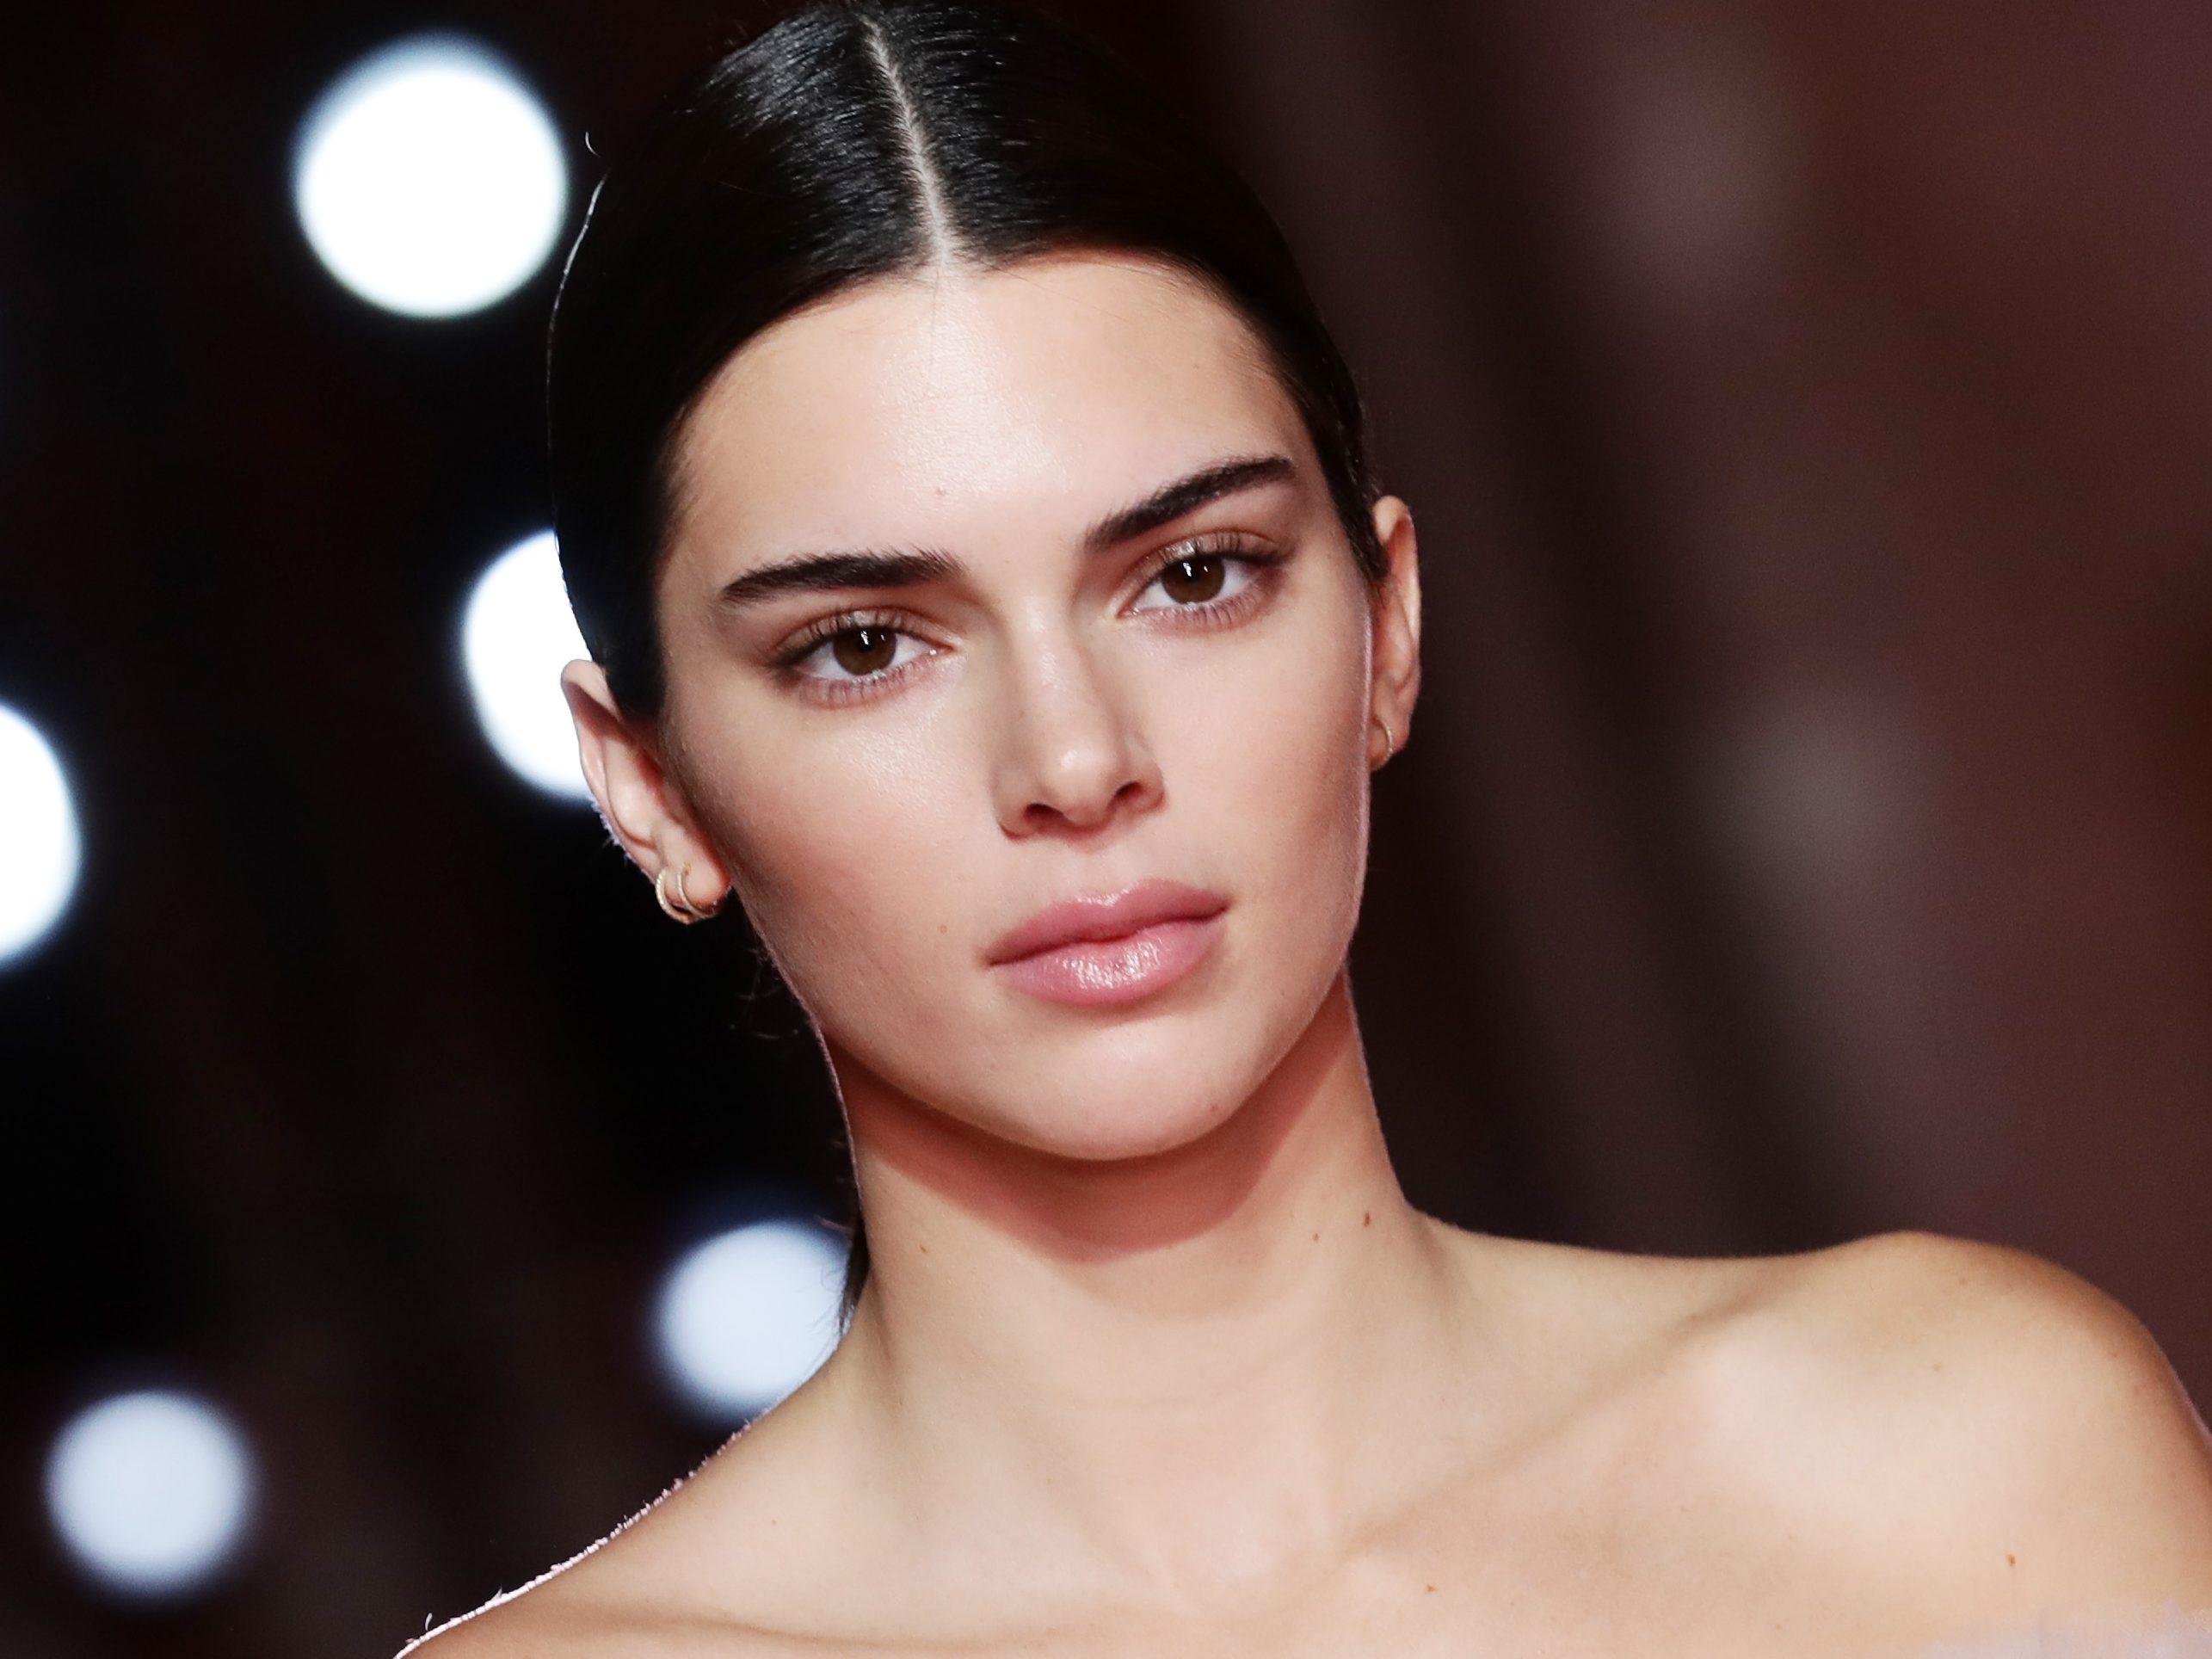 Kendall Jenner poses topless on magazine cover created by banana artist ...